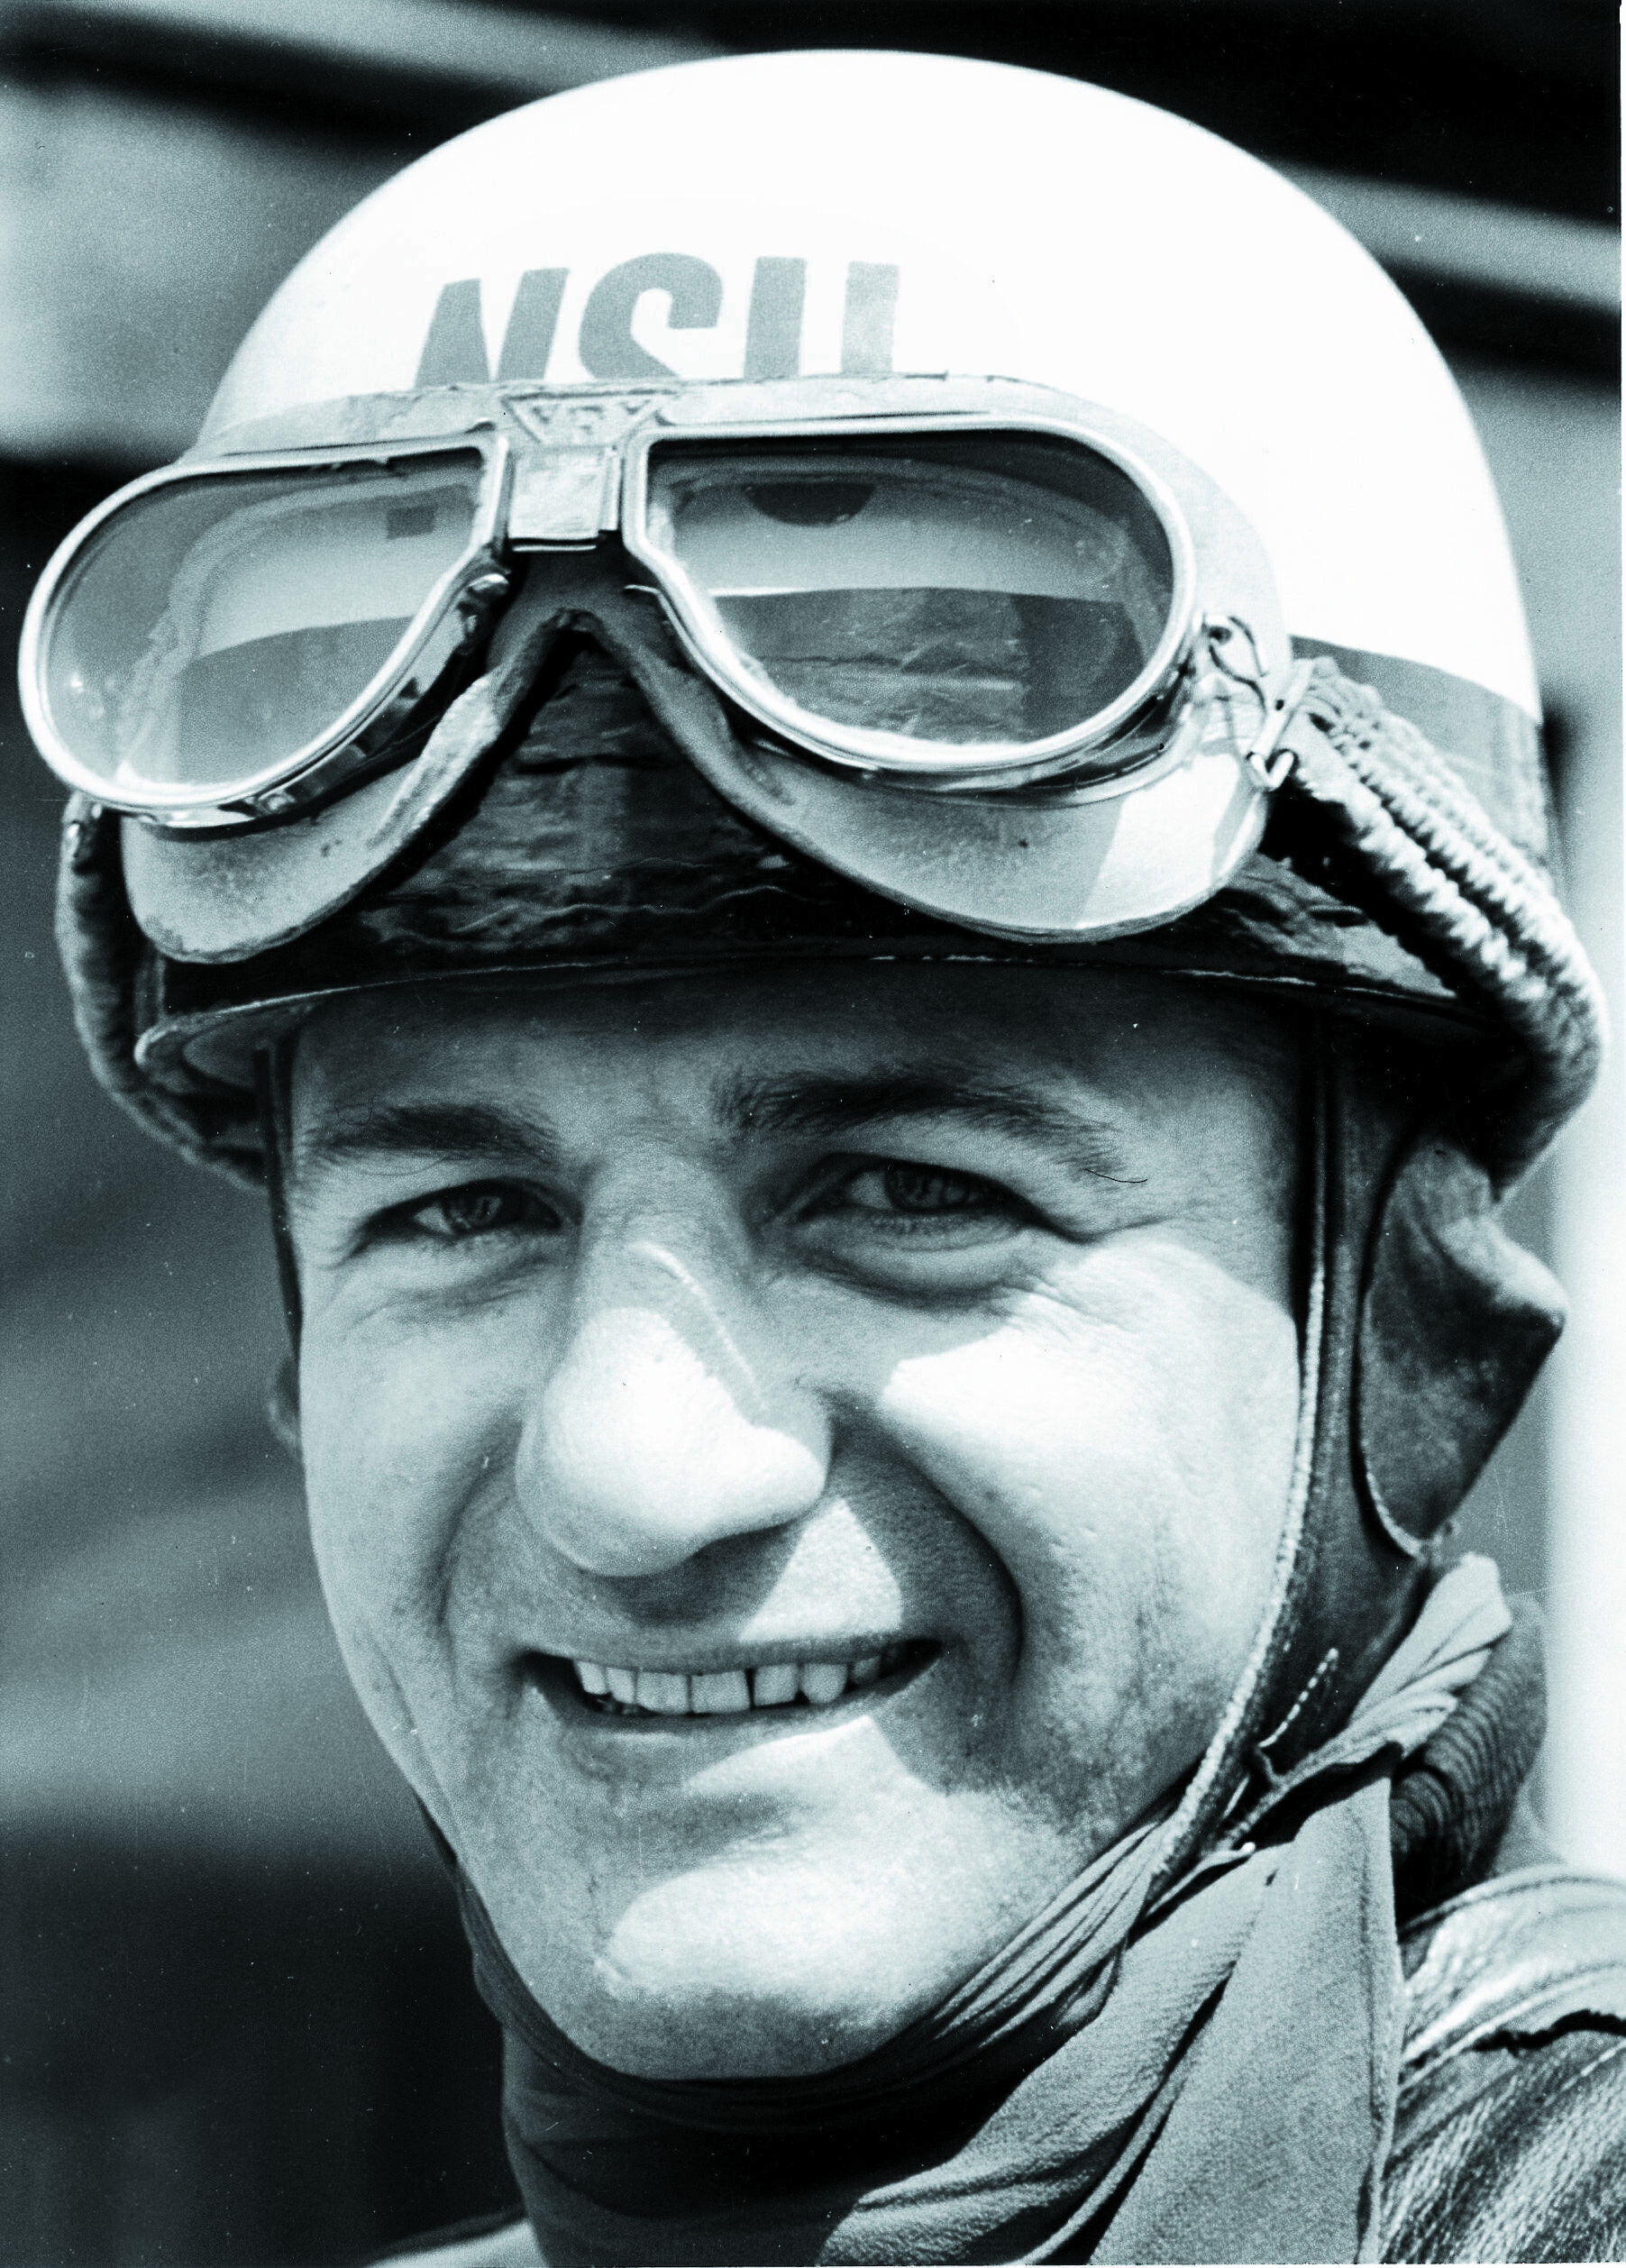 H.P. Müller 1955: motorcycle world champion in the 250 cc class for NSU